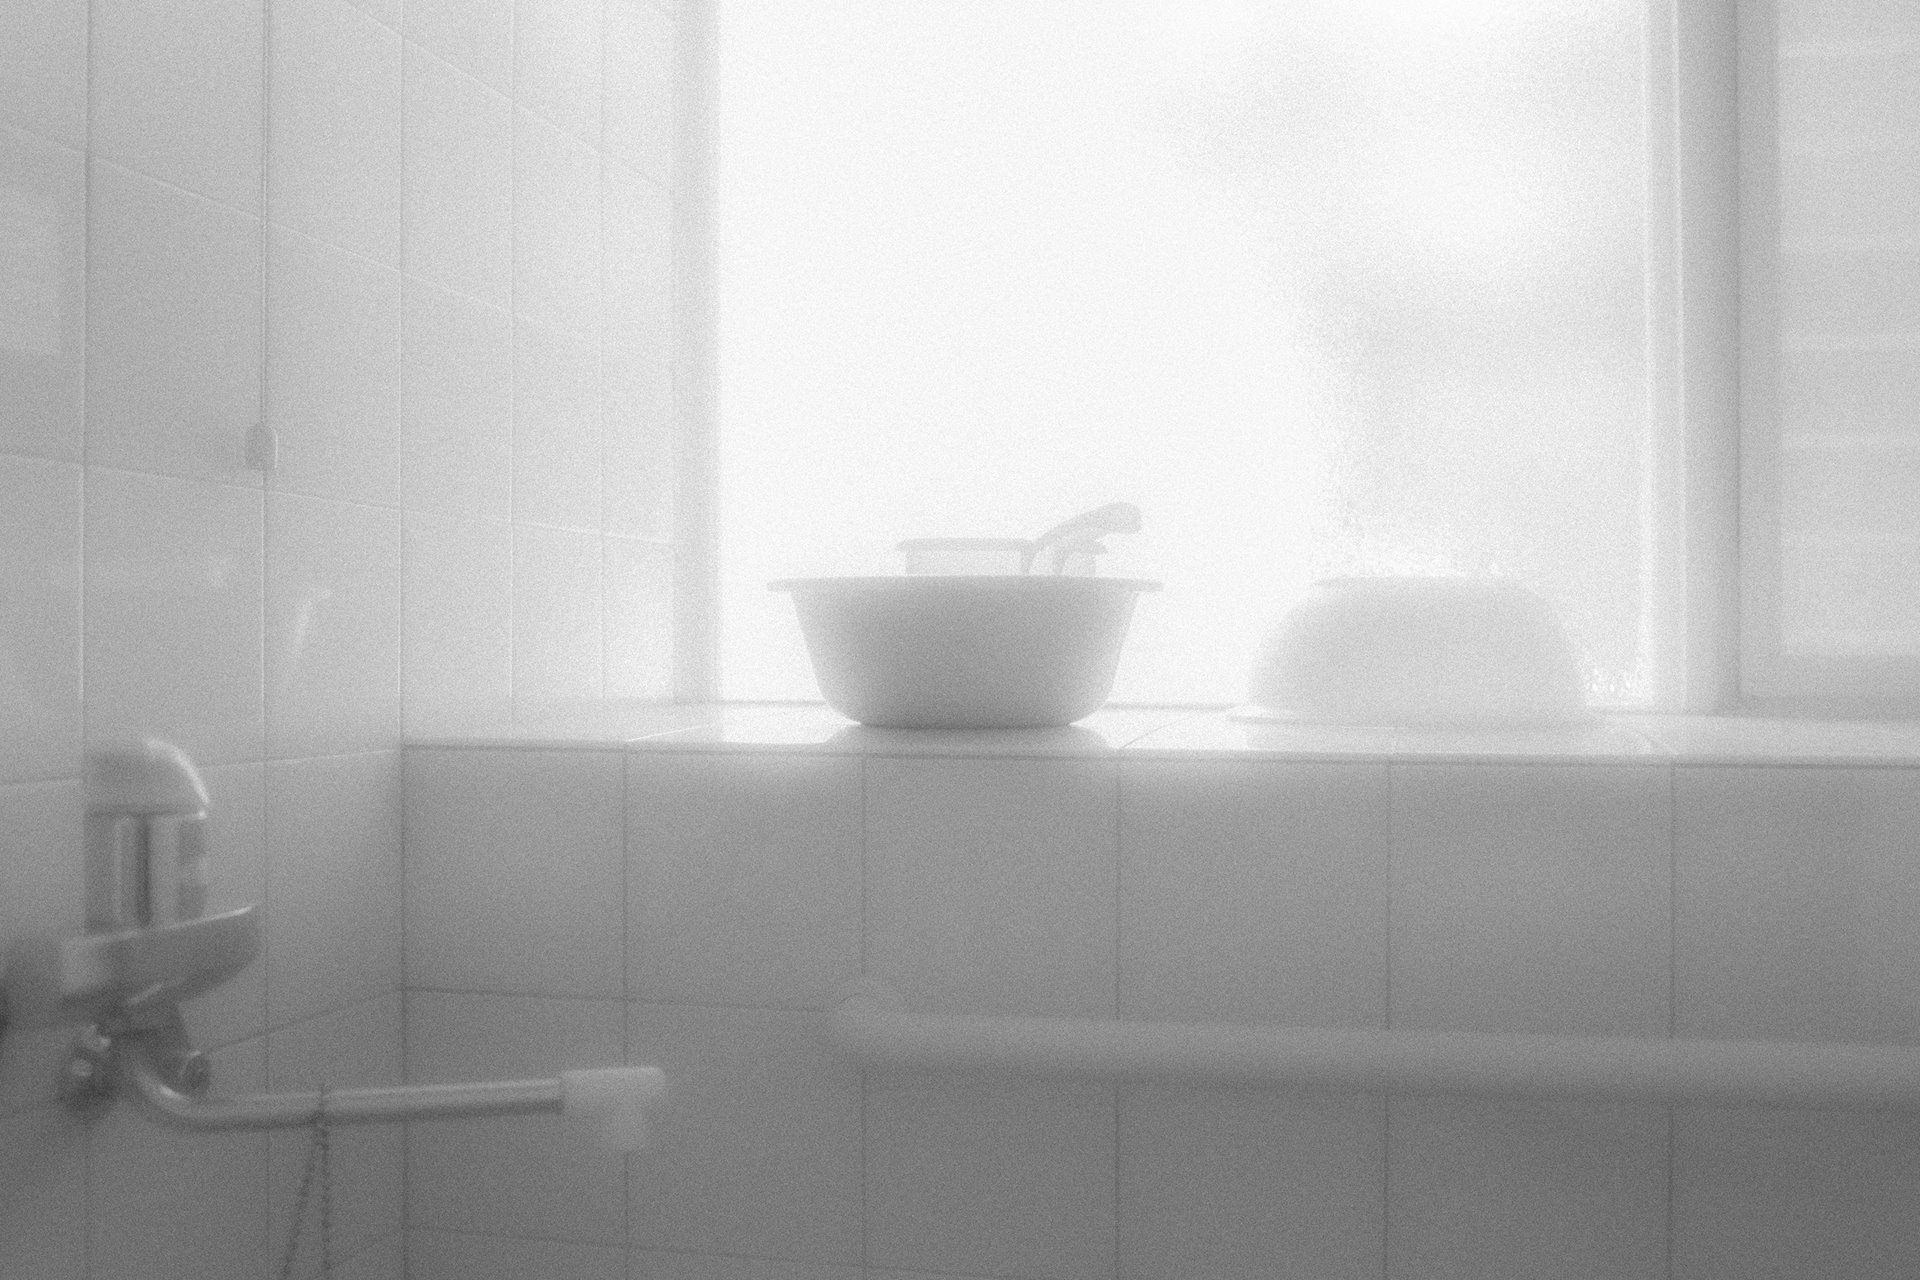 2000<br />
&ldquo;She also lost her ability to use the toilet. Constipation and bladder control are difficult problems. When her skin or underwear becomes soiled, I have to give her a bath to get clean. I renovated our bathroom to be make it barrier-free.&rdquo; &ndash; Masaharu Taniguchi.&nbsp;<br />
&nbsp;